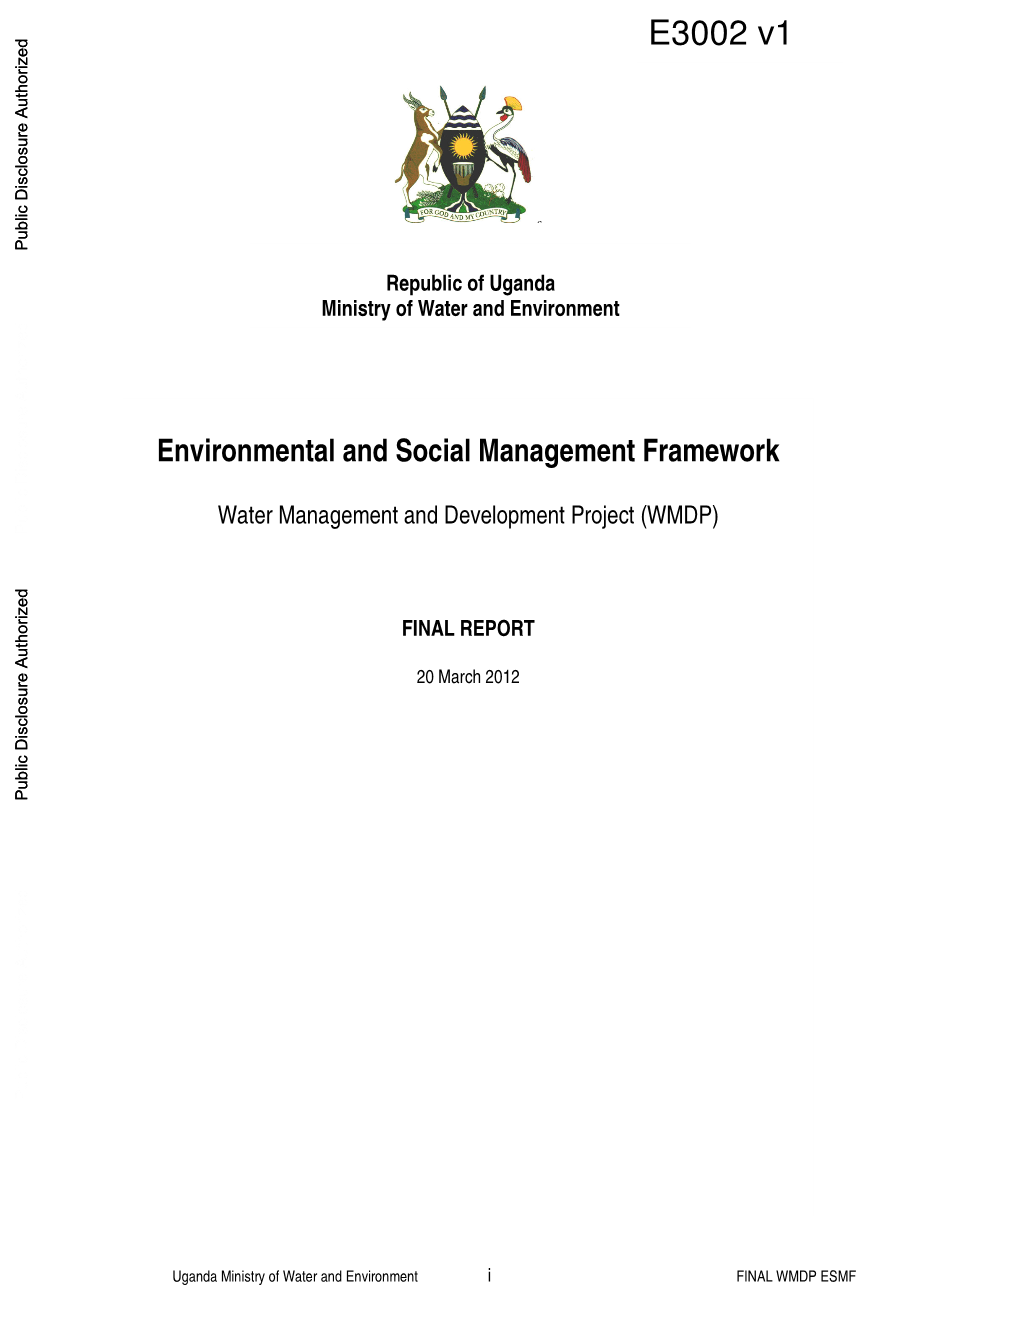 Format of an Annual Environmental Report for the WMDP